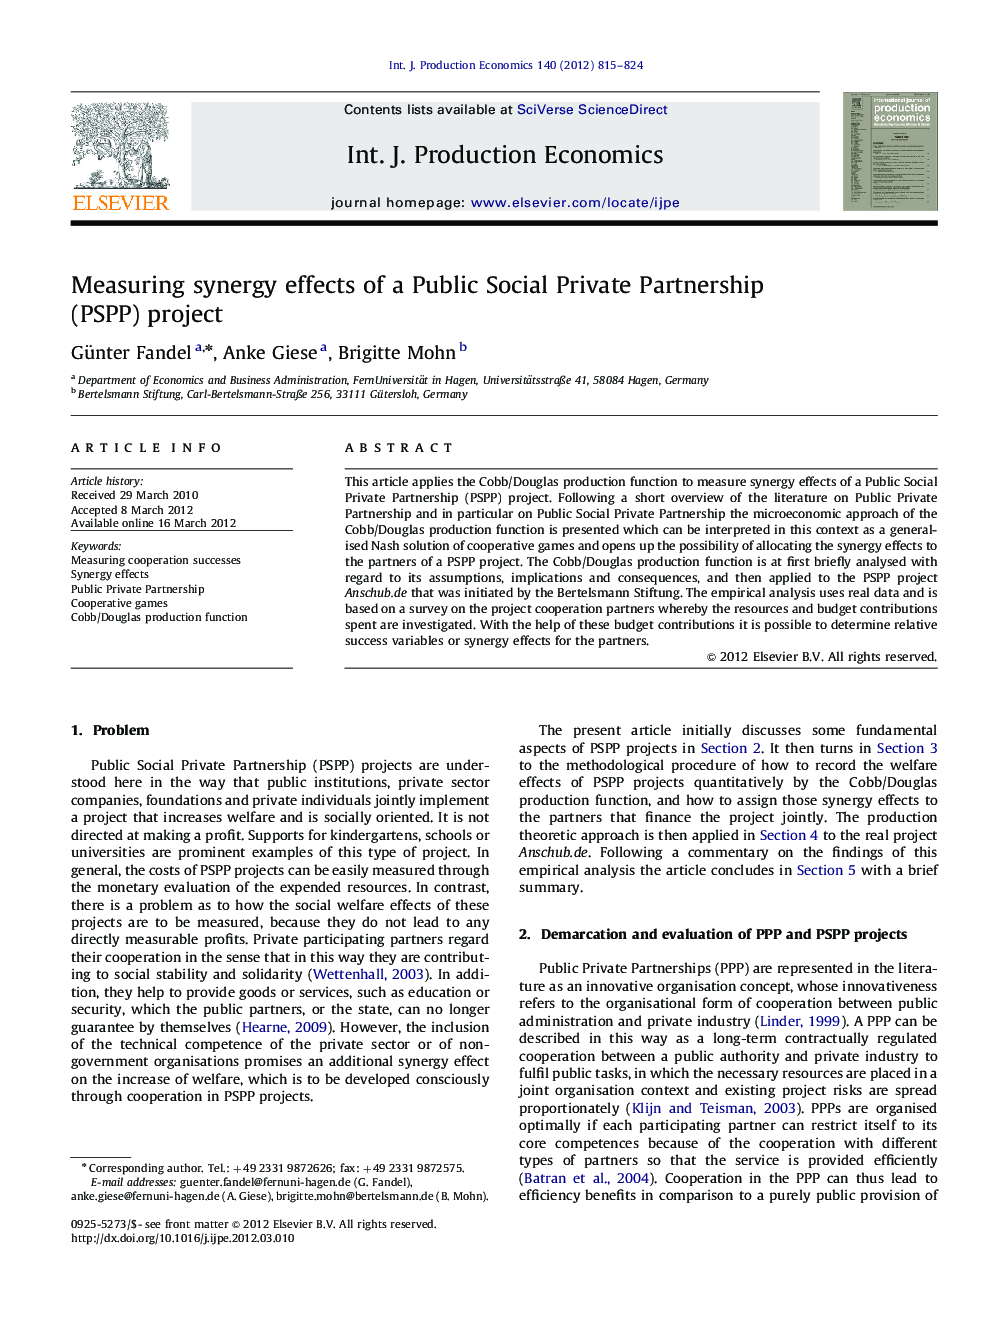 Measuring synergy effects of a Public Social Private Partnership (PSPP) project